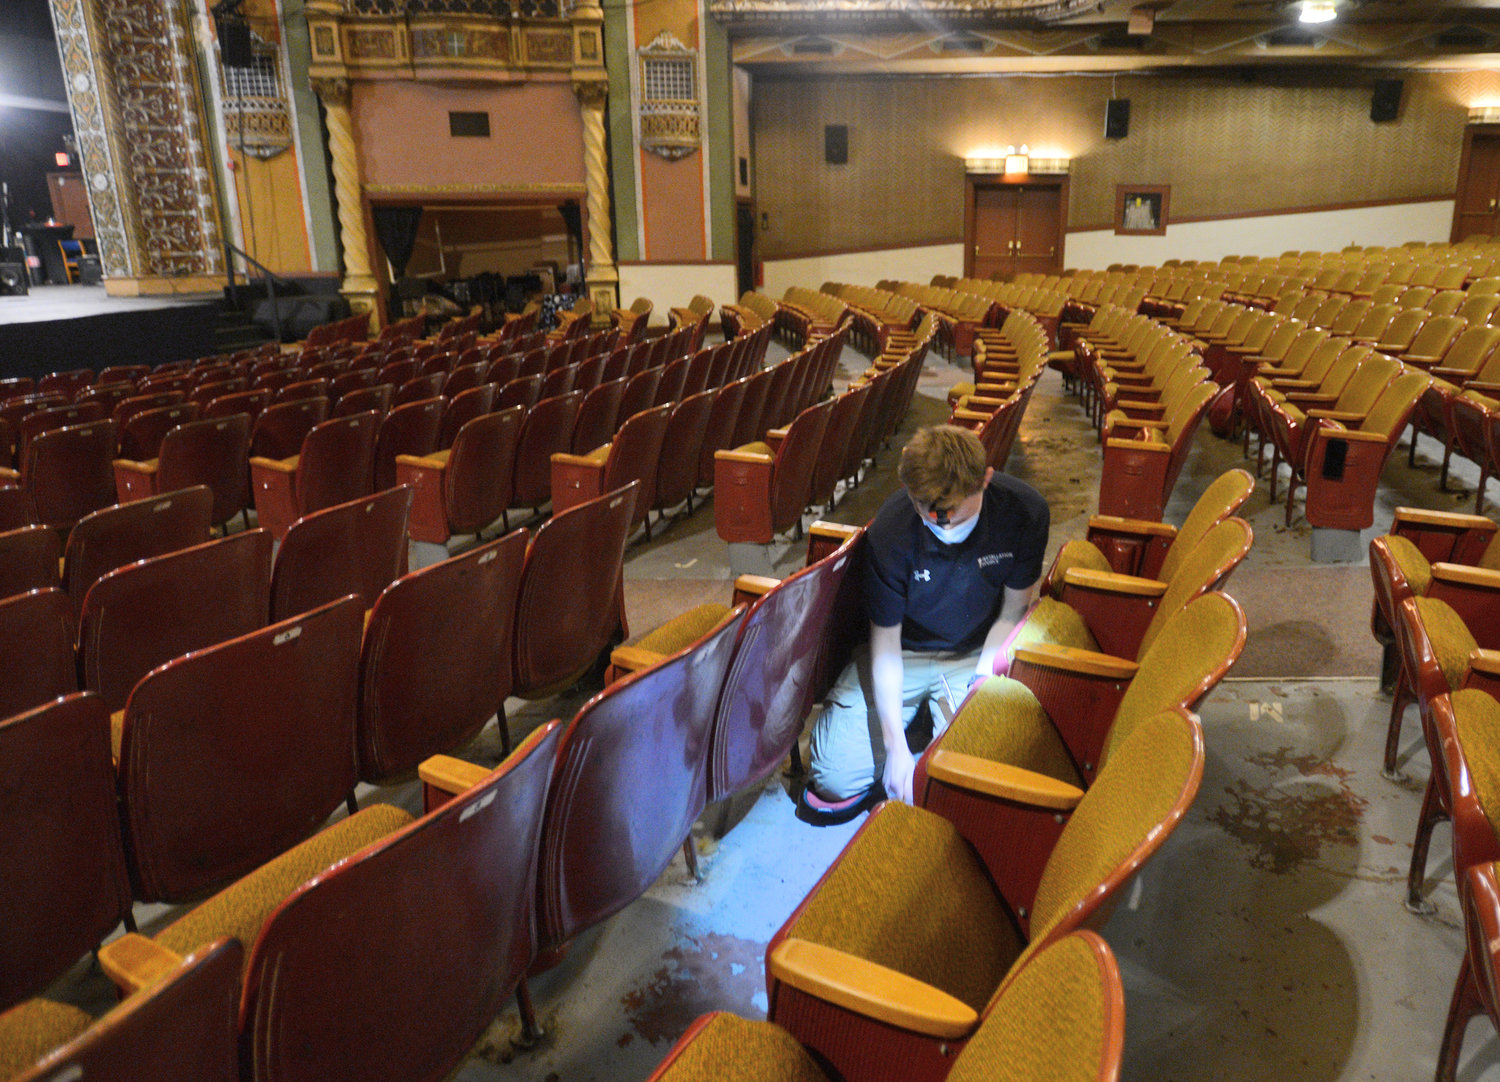 Workers from Kentucky dismantle the old seats at the Capitol Theatre in Rome. The original seats were installed in 1952.